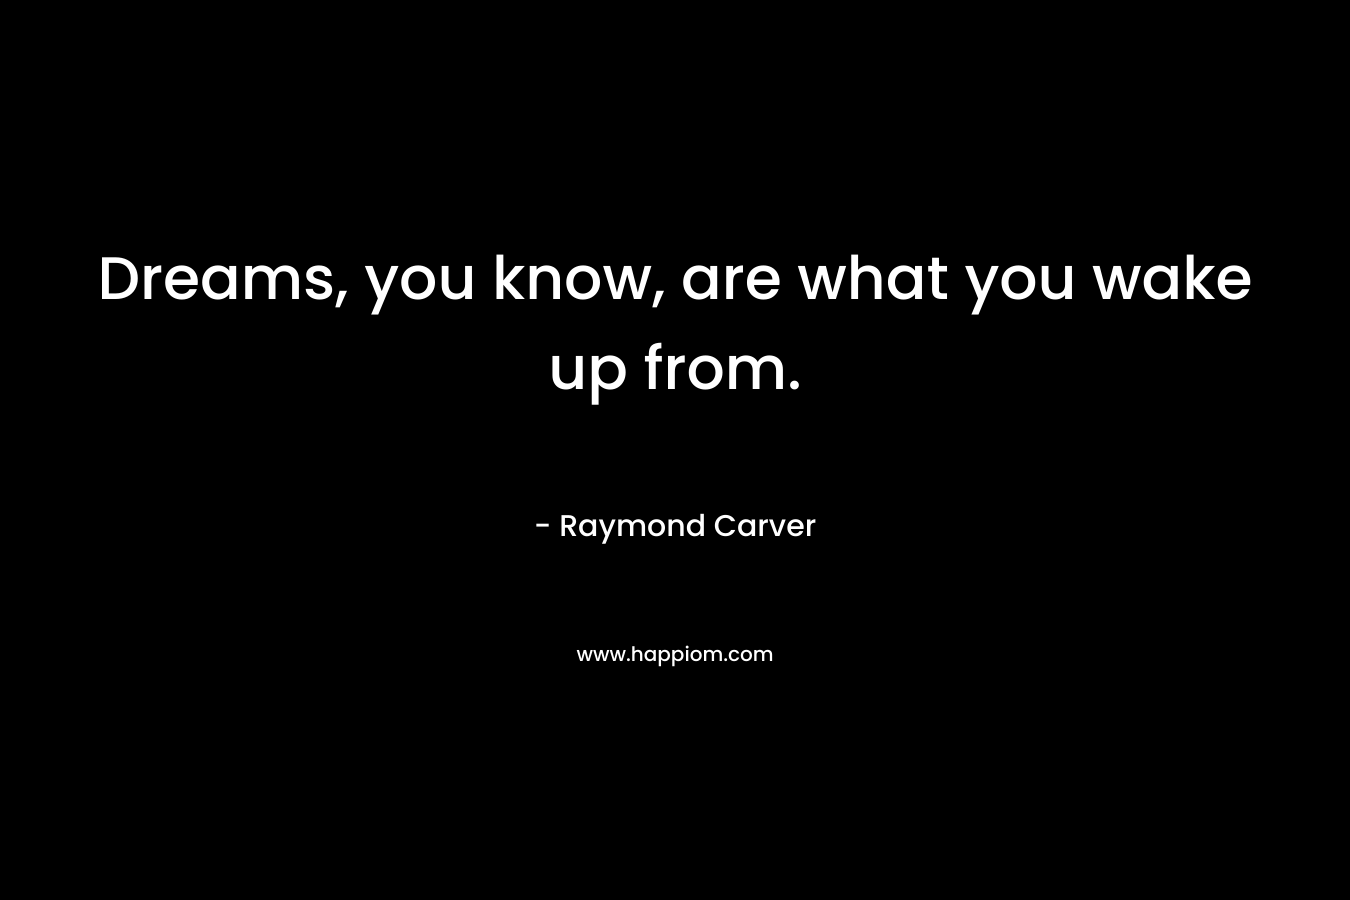 Dreams, you know, are what you wake up from. – Raymond Carver